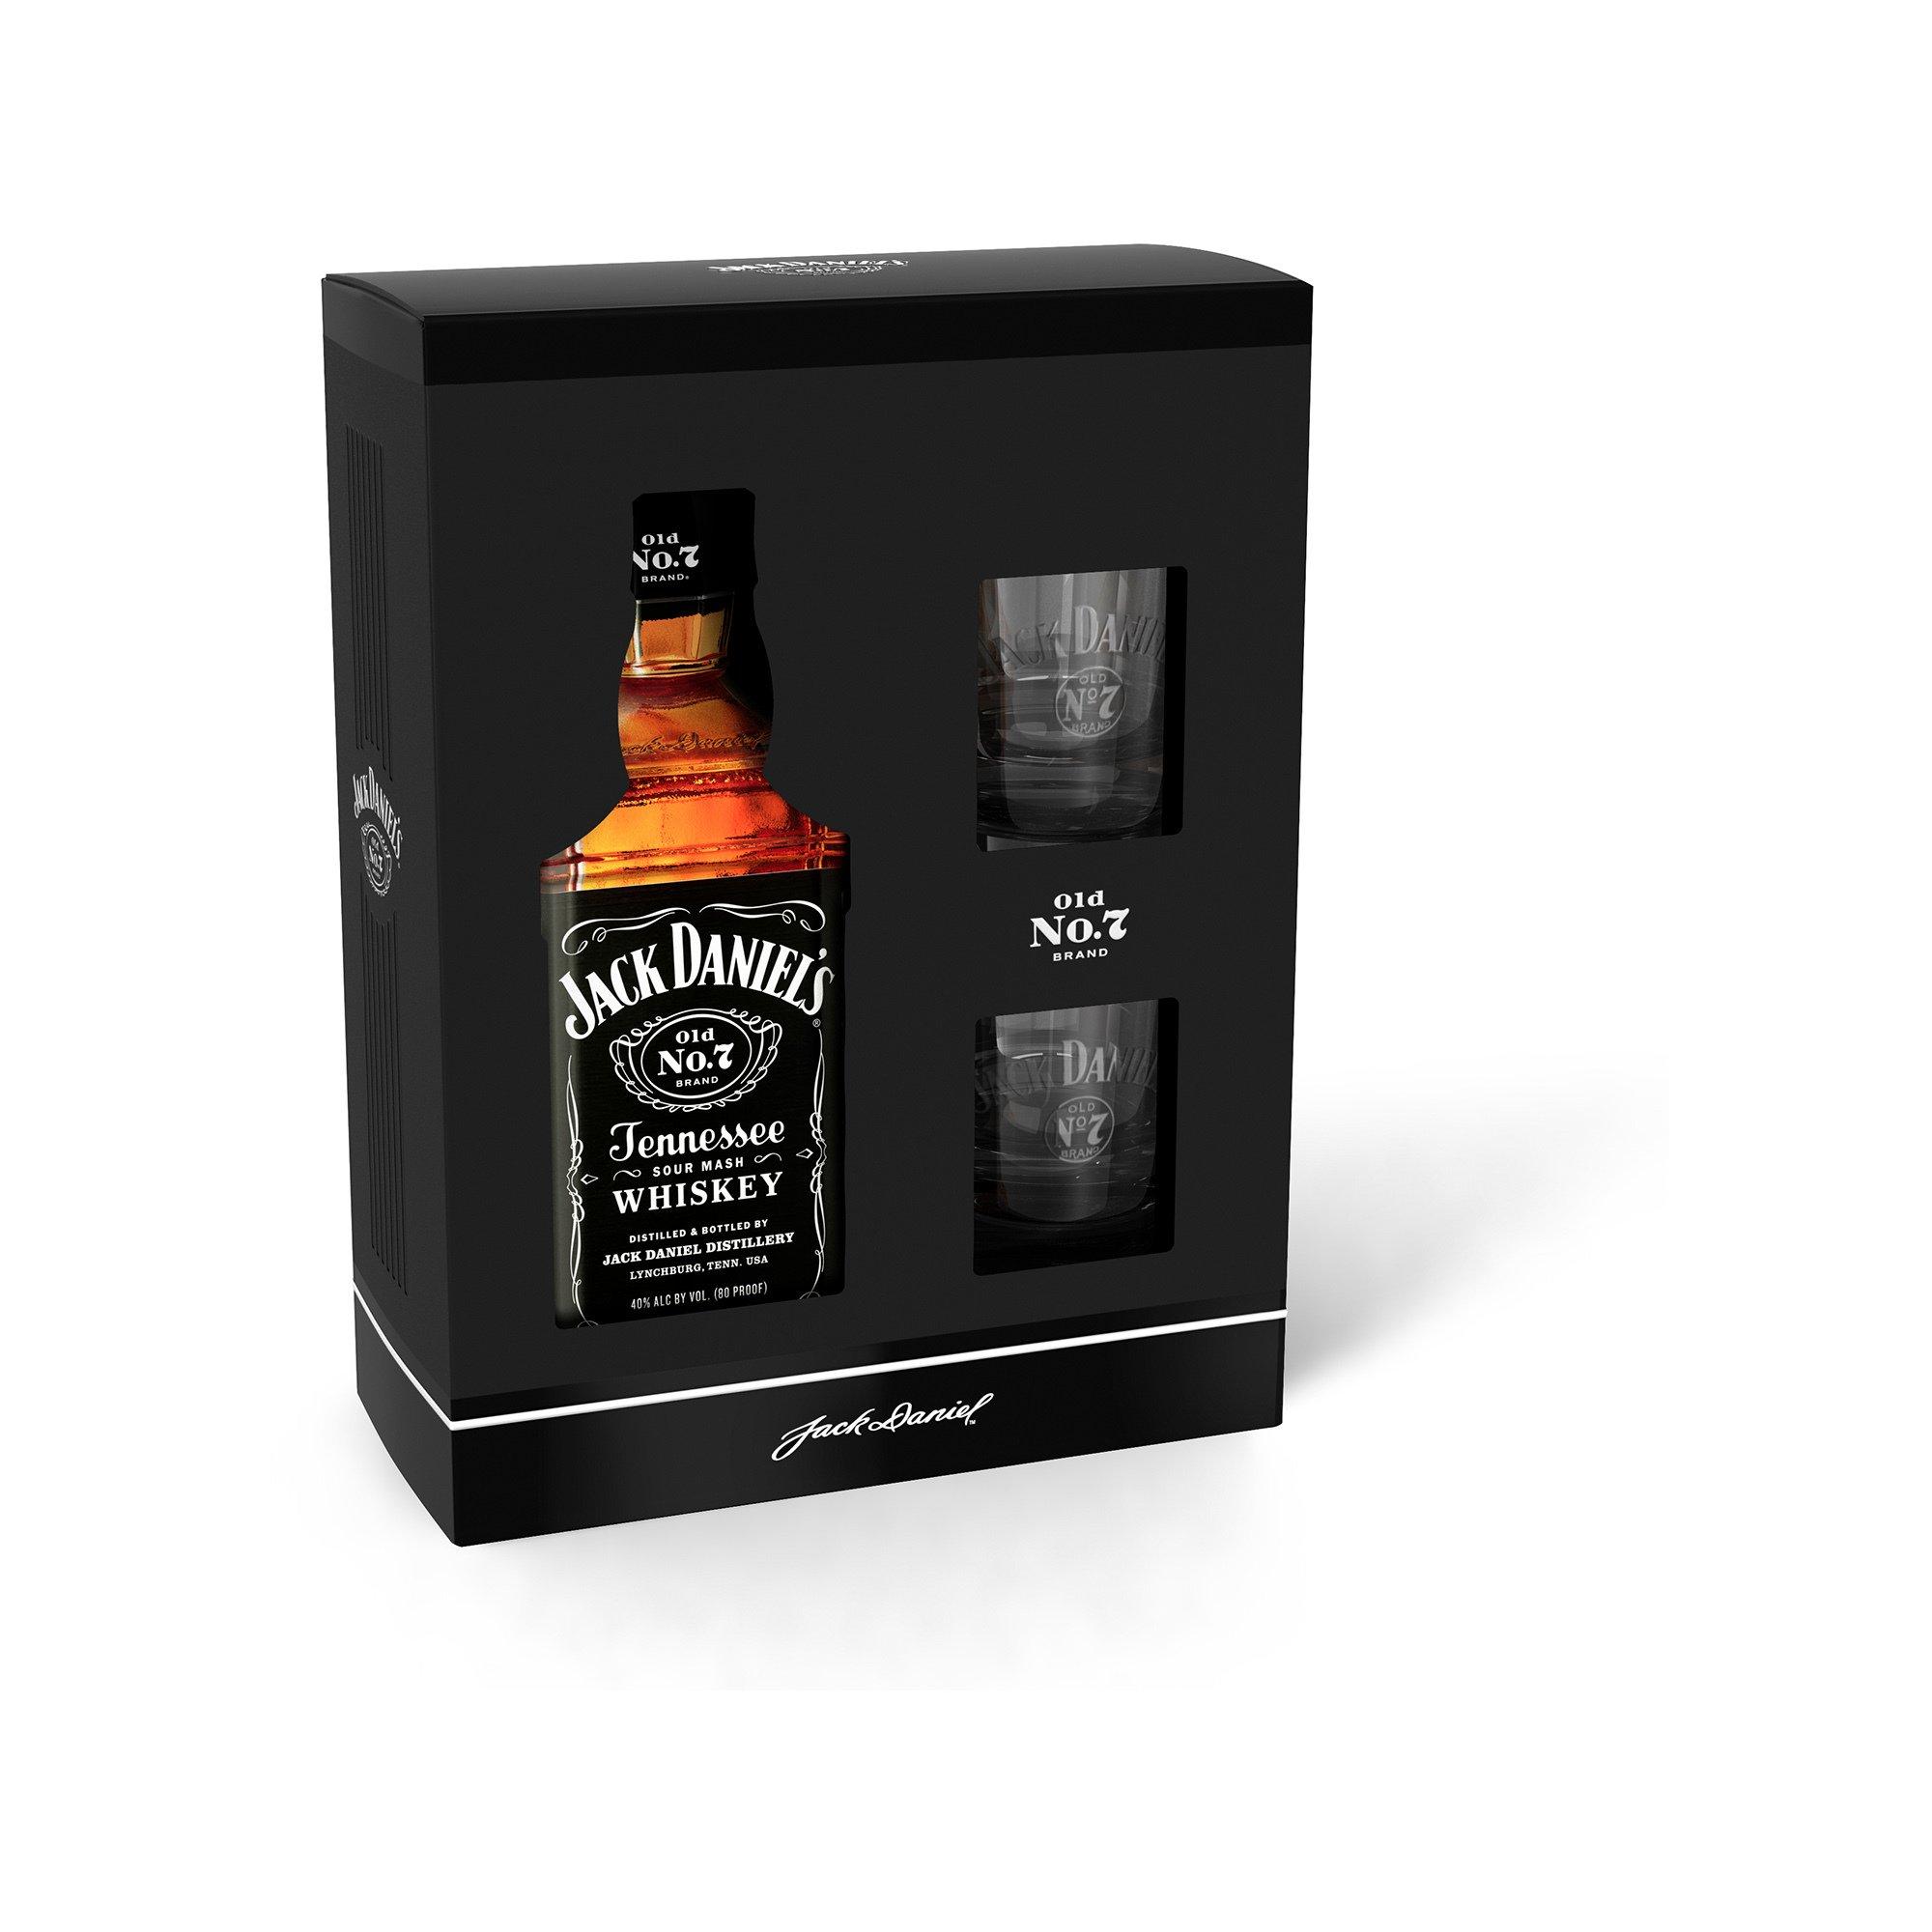 Jack Daniel's Old No. 7 Tennessee Whiskey  